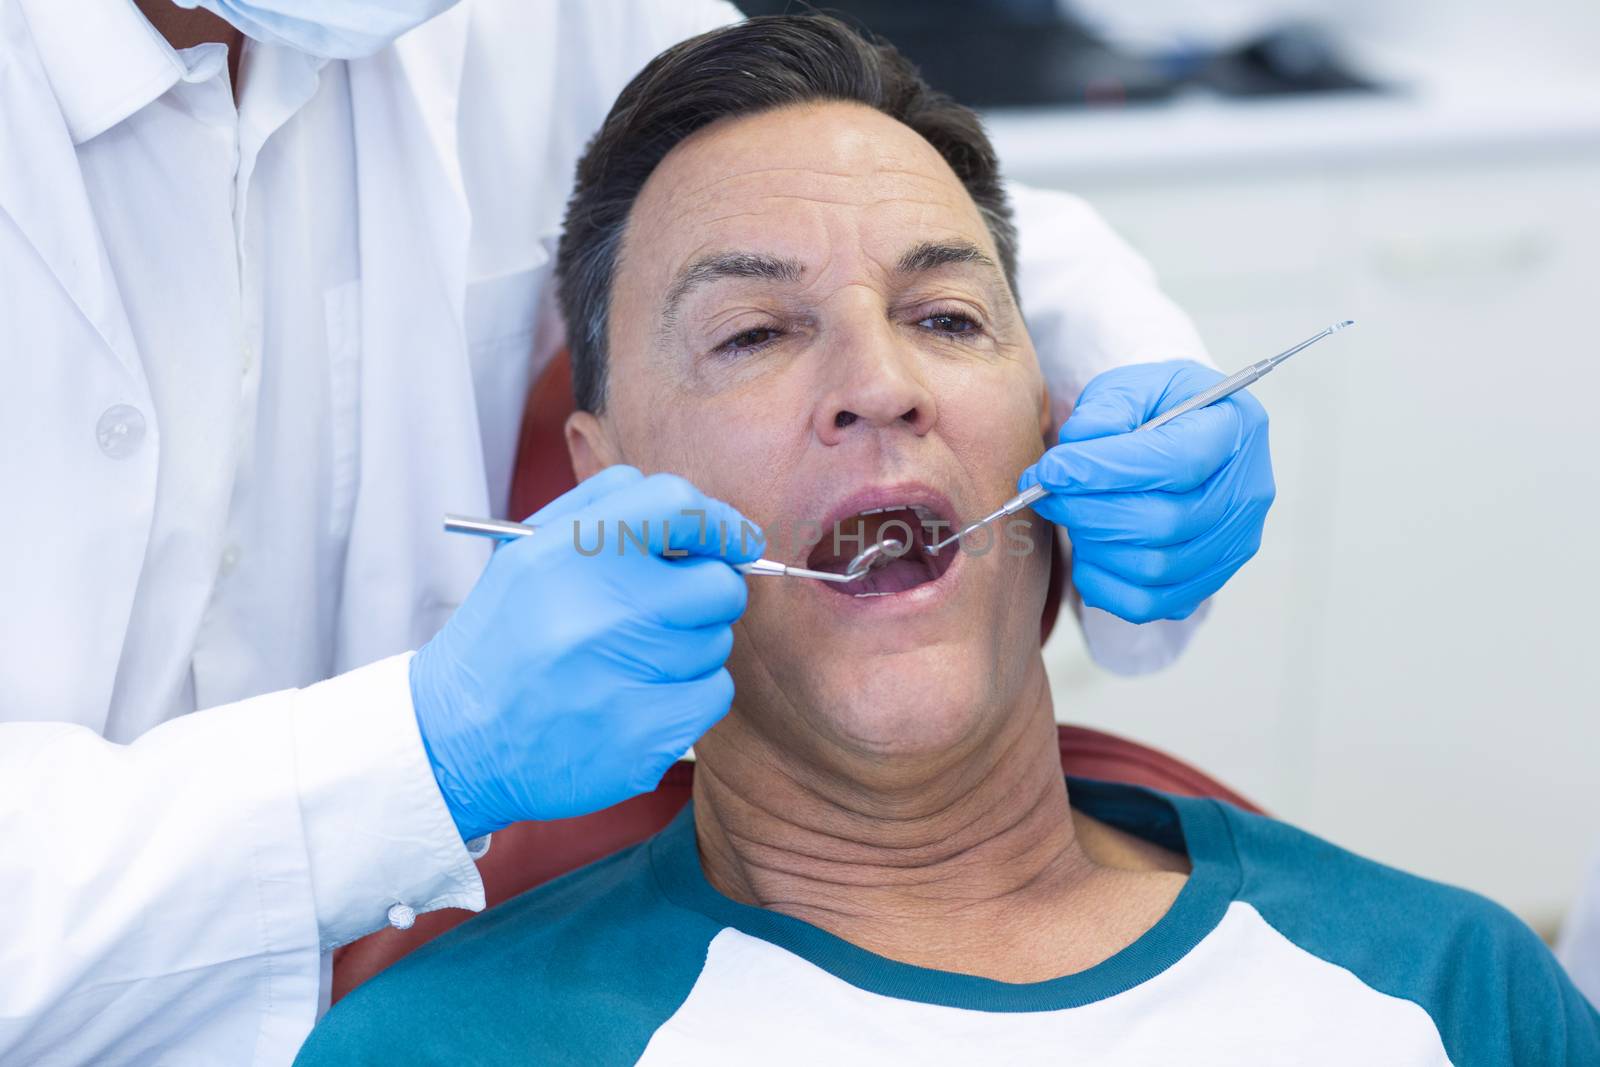 Dentist examining a male patient with tools by Wavebreakmedia